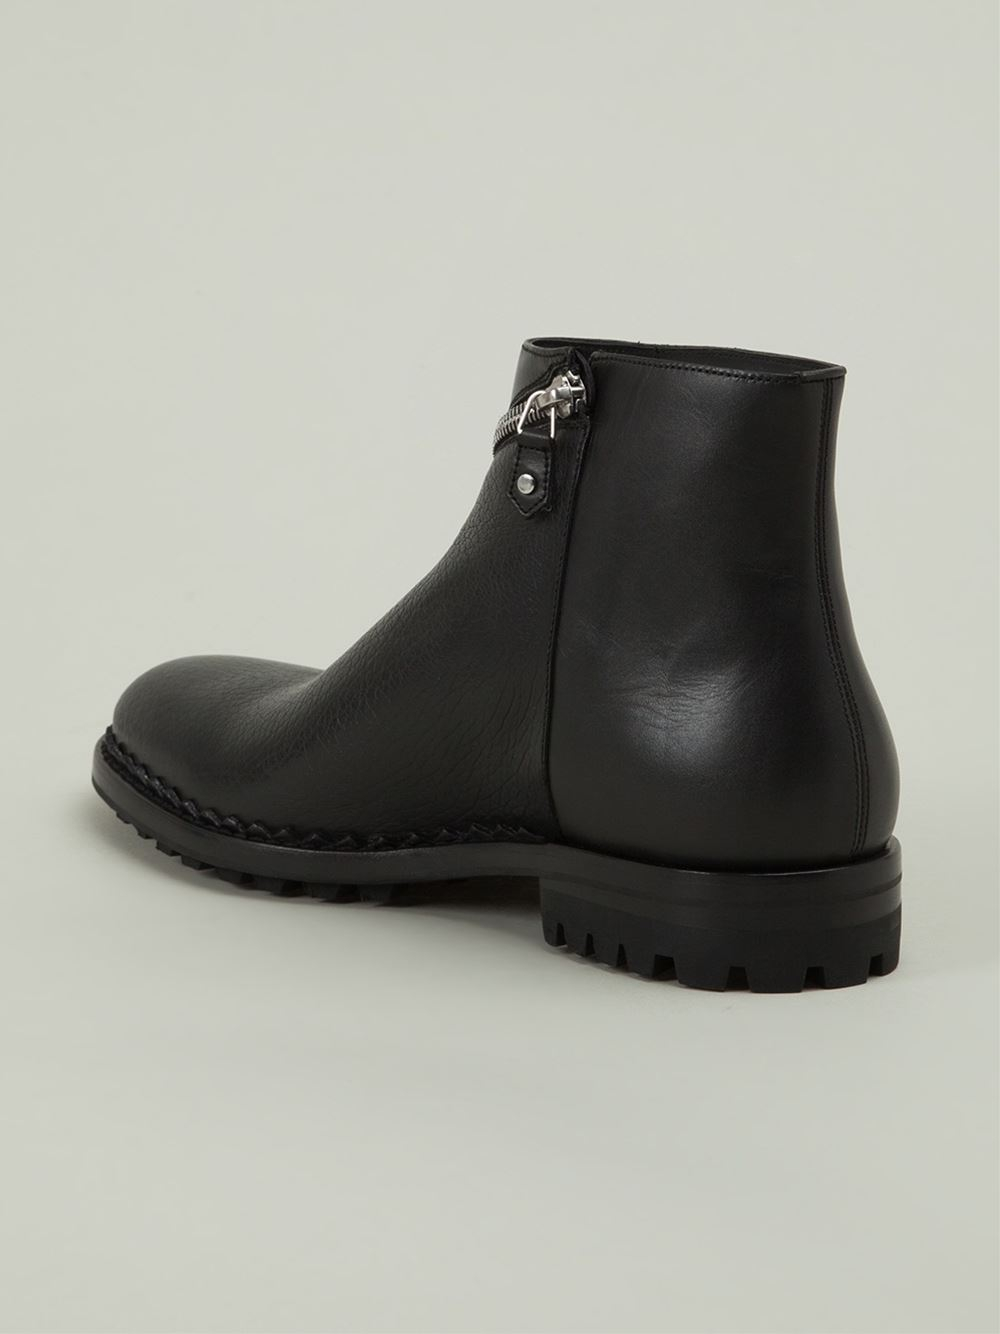 Balenciaga Zip Ankle Boots in Black for Men - Lyst